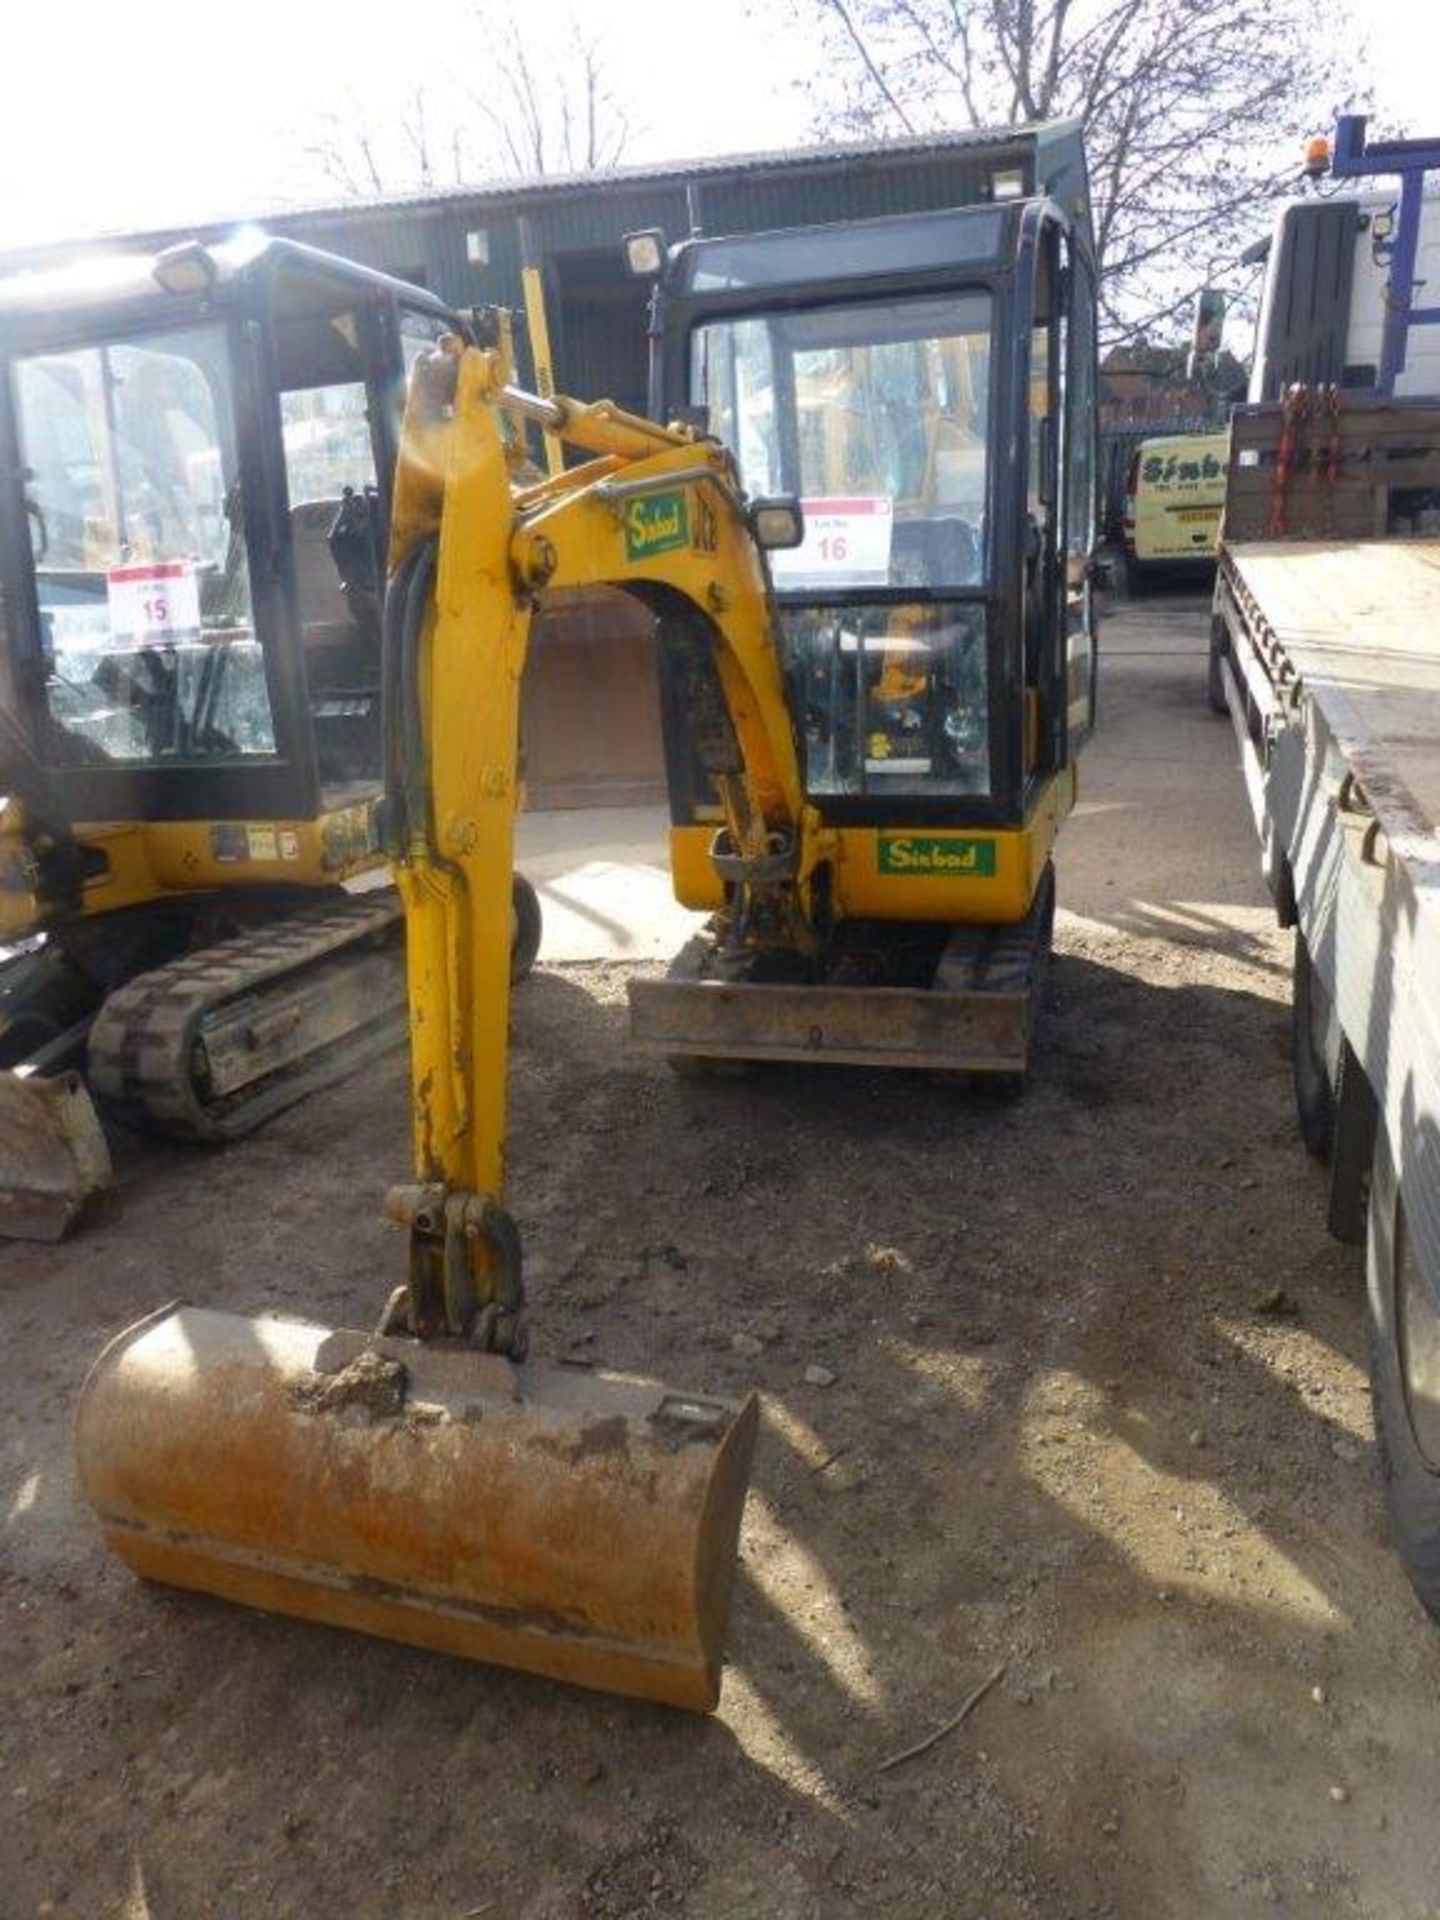 JCB 8015 rubber tracked mini excavator (2000), indicated hours 1444.2, Serial no. 04862, weight